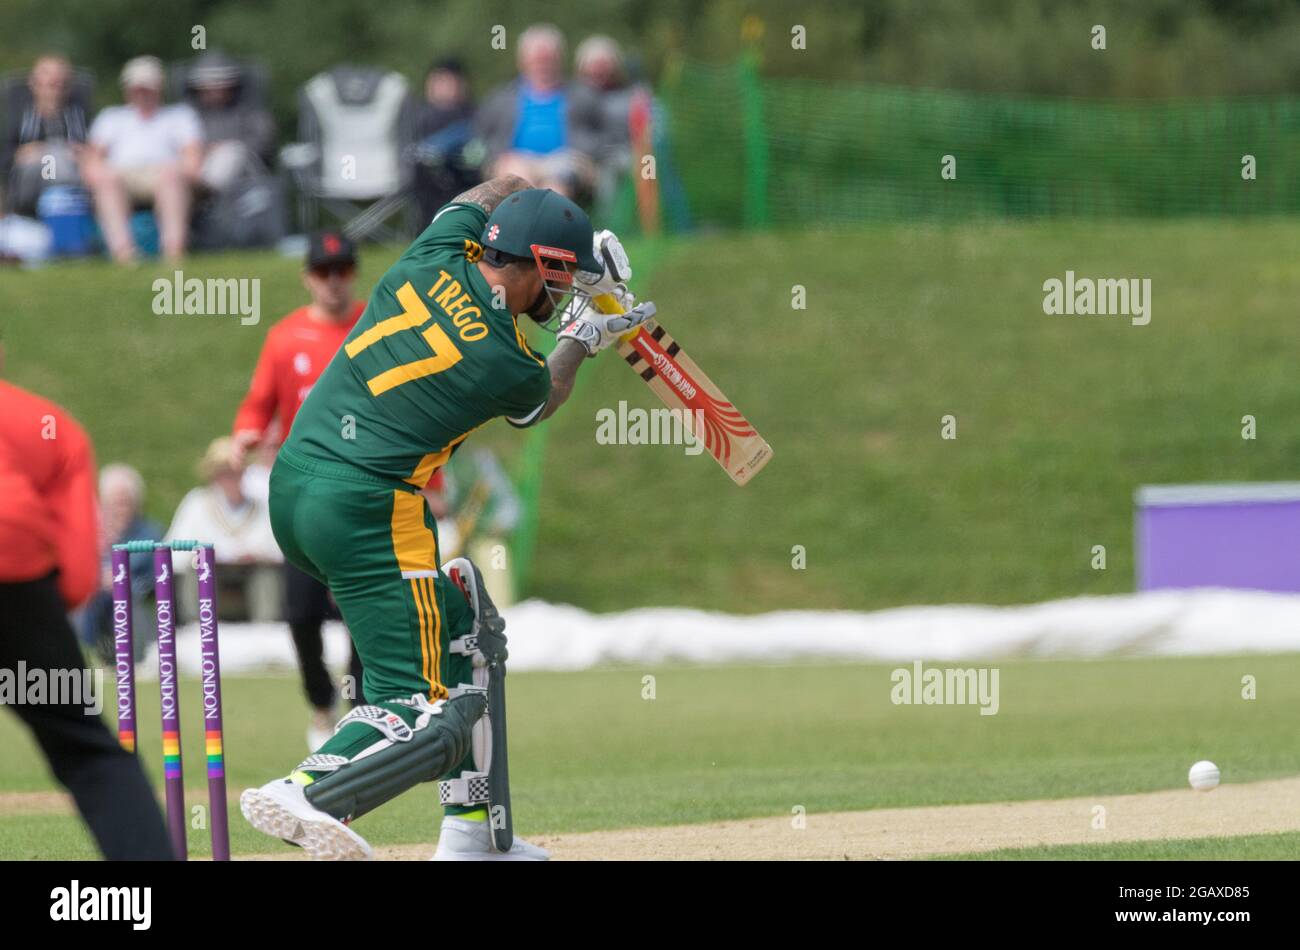 John Fretwell Sporting Complex, Mansfield, Nottinghamshire, UK. 1st August 2021. Group B Nottinghamshire Outlaws take on Leicestershire Foxes at the John Fretwell Sporting Complex in the Royal London One-day Cup Credit: Alan Beastall/Alamy Live News. Stock Photo